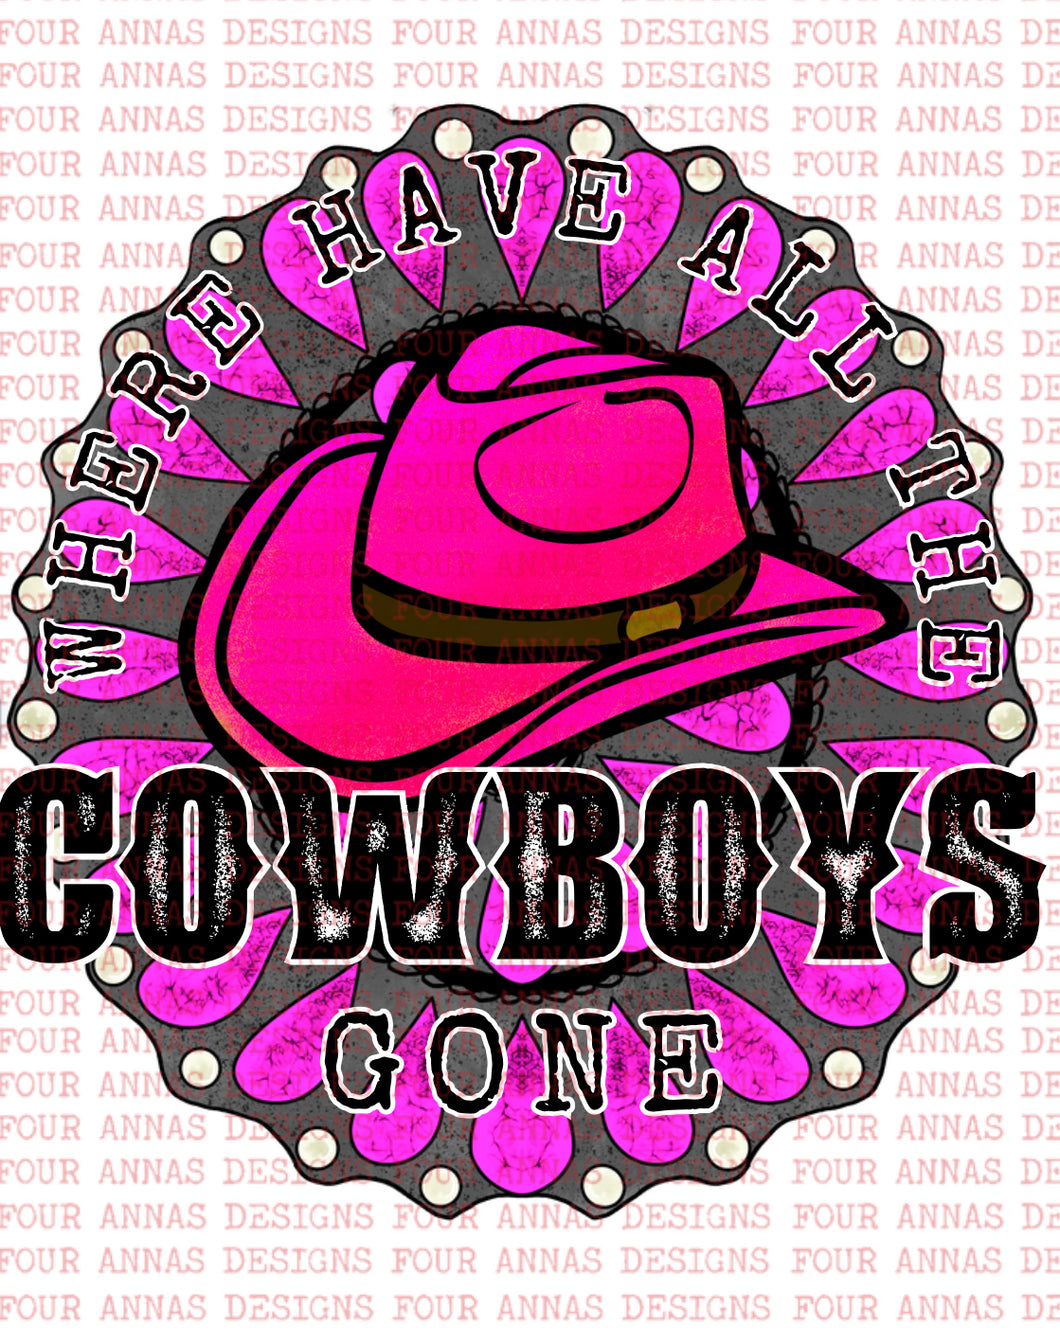 Where are the cowboys pink